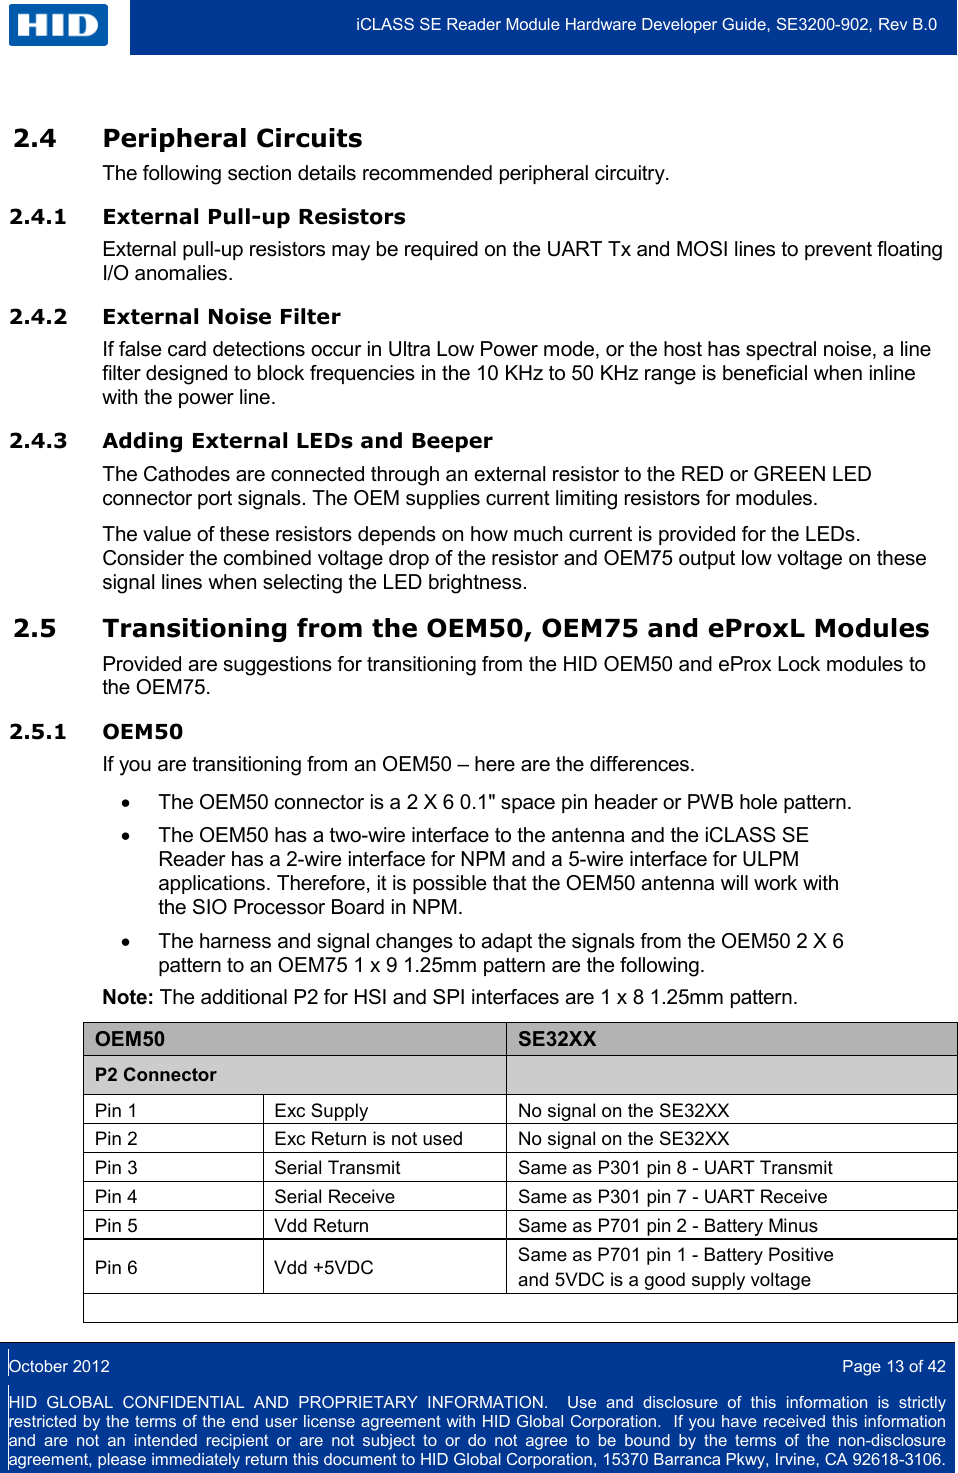  iCLASS SE Reader Module Hardware Developer Guide, SE3200-902, Rev B.0  October 2012  Page 13 of 42 HID GLOBAL CONFIDENTIAL AND PROPRIETARY INFORMATION.  Use and disclosure of this information is strictly restricted by the terms of the end user license agreement with HID Global Corporation.  If you have received this information and are not an intended recipient or are not subject to or do not agree to be bound by the terms of the non-disclosure agreement, please immediately return this document to HID Global Corporation, 15370 Barranca Pkwy, Irvine, CA 92618-3106.  2.4 Peripheral Circuits The following section details recommended peripheral circuitry.  2.4.1 External Pull-up Resistors External pull-up resistors may be required on the UART Tx and MOSI lines to prevent floating I/O anomalies. 2.4.2 External Noise Filter  If false card detections occur in Ultra Low Power mode, or the host has spectral noise, a line filter designed to block frequencies in the 10 KHz to 50 KHz range is beneficial when inline with the power line.  2.4.3 Adding External LEDs and Beeper The Cathodes are connected through an external resistor to the RED or GREEN LED connector port signals. The OEM supplies current limiting resistors for modules.  The value of these resistors depends on how much current is provided for the LEDs. Consider the combined voltage drop of the resistor and OEM75 output low voltage on these signal lines when selecting the LED brightness.  2.5 Transitioning from the OEM50, OEM75 and eProxL Modules Provided are suggestions for transitioning from the HID OEM50 and eProx Lock modules to the OEM75. 2.5.1 OEM50 If you are transitioning from an OEM50 – here are the differences. • The OEM50 connector is a 2 X 6 0.1&quot; space pin header or PWB hole pattern. • The OEM50 has a two-wire interface to the antenna and the iCLASS SE Reader has a 2-wire interface for NPM and a 5-wire interface for ULPM applications. Therefore, it is possible that the OEM50 antenna will work with the SIO Processor Board in NPM. • The harness and signal changes to adapt the signals from the OEM50 2 X 6 pattern to an OEM75 1 x 9 1.25mm pattern are the following. Note: The additional P2 for HSI and SPI interfaces are 1 x 8 1.25mm pattern. OEM50 SE32XX P2 Connector   Pin 1 Exc Supply No signal on the SE32XX Pin 2 Exc Return is not used No signal on the SE32XX Pin 3 Serial Transmit Same as P301 pin 8 - UART Transmit Pin 4 Serial Receive Same as P301 pin 7 - UART Receive Pin 5 Vdd Return Same as P701 pin 2 - Battery Minus Pin 6 Vdd +5VDC Same as P701 pin 1 - Battery Positive  and 5VDC is a good supply voltage    